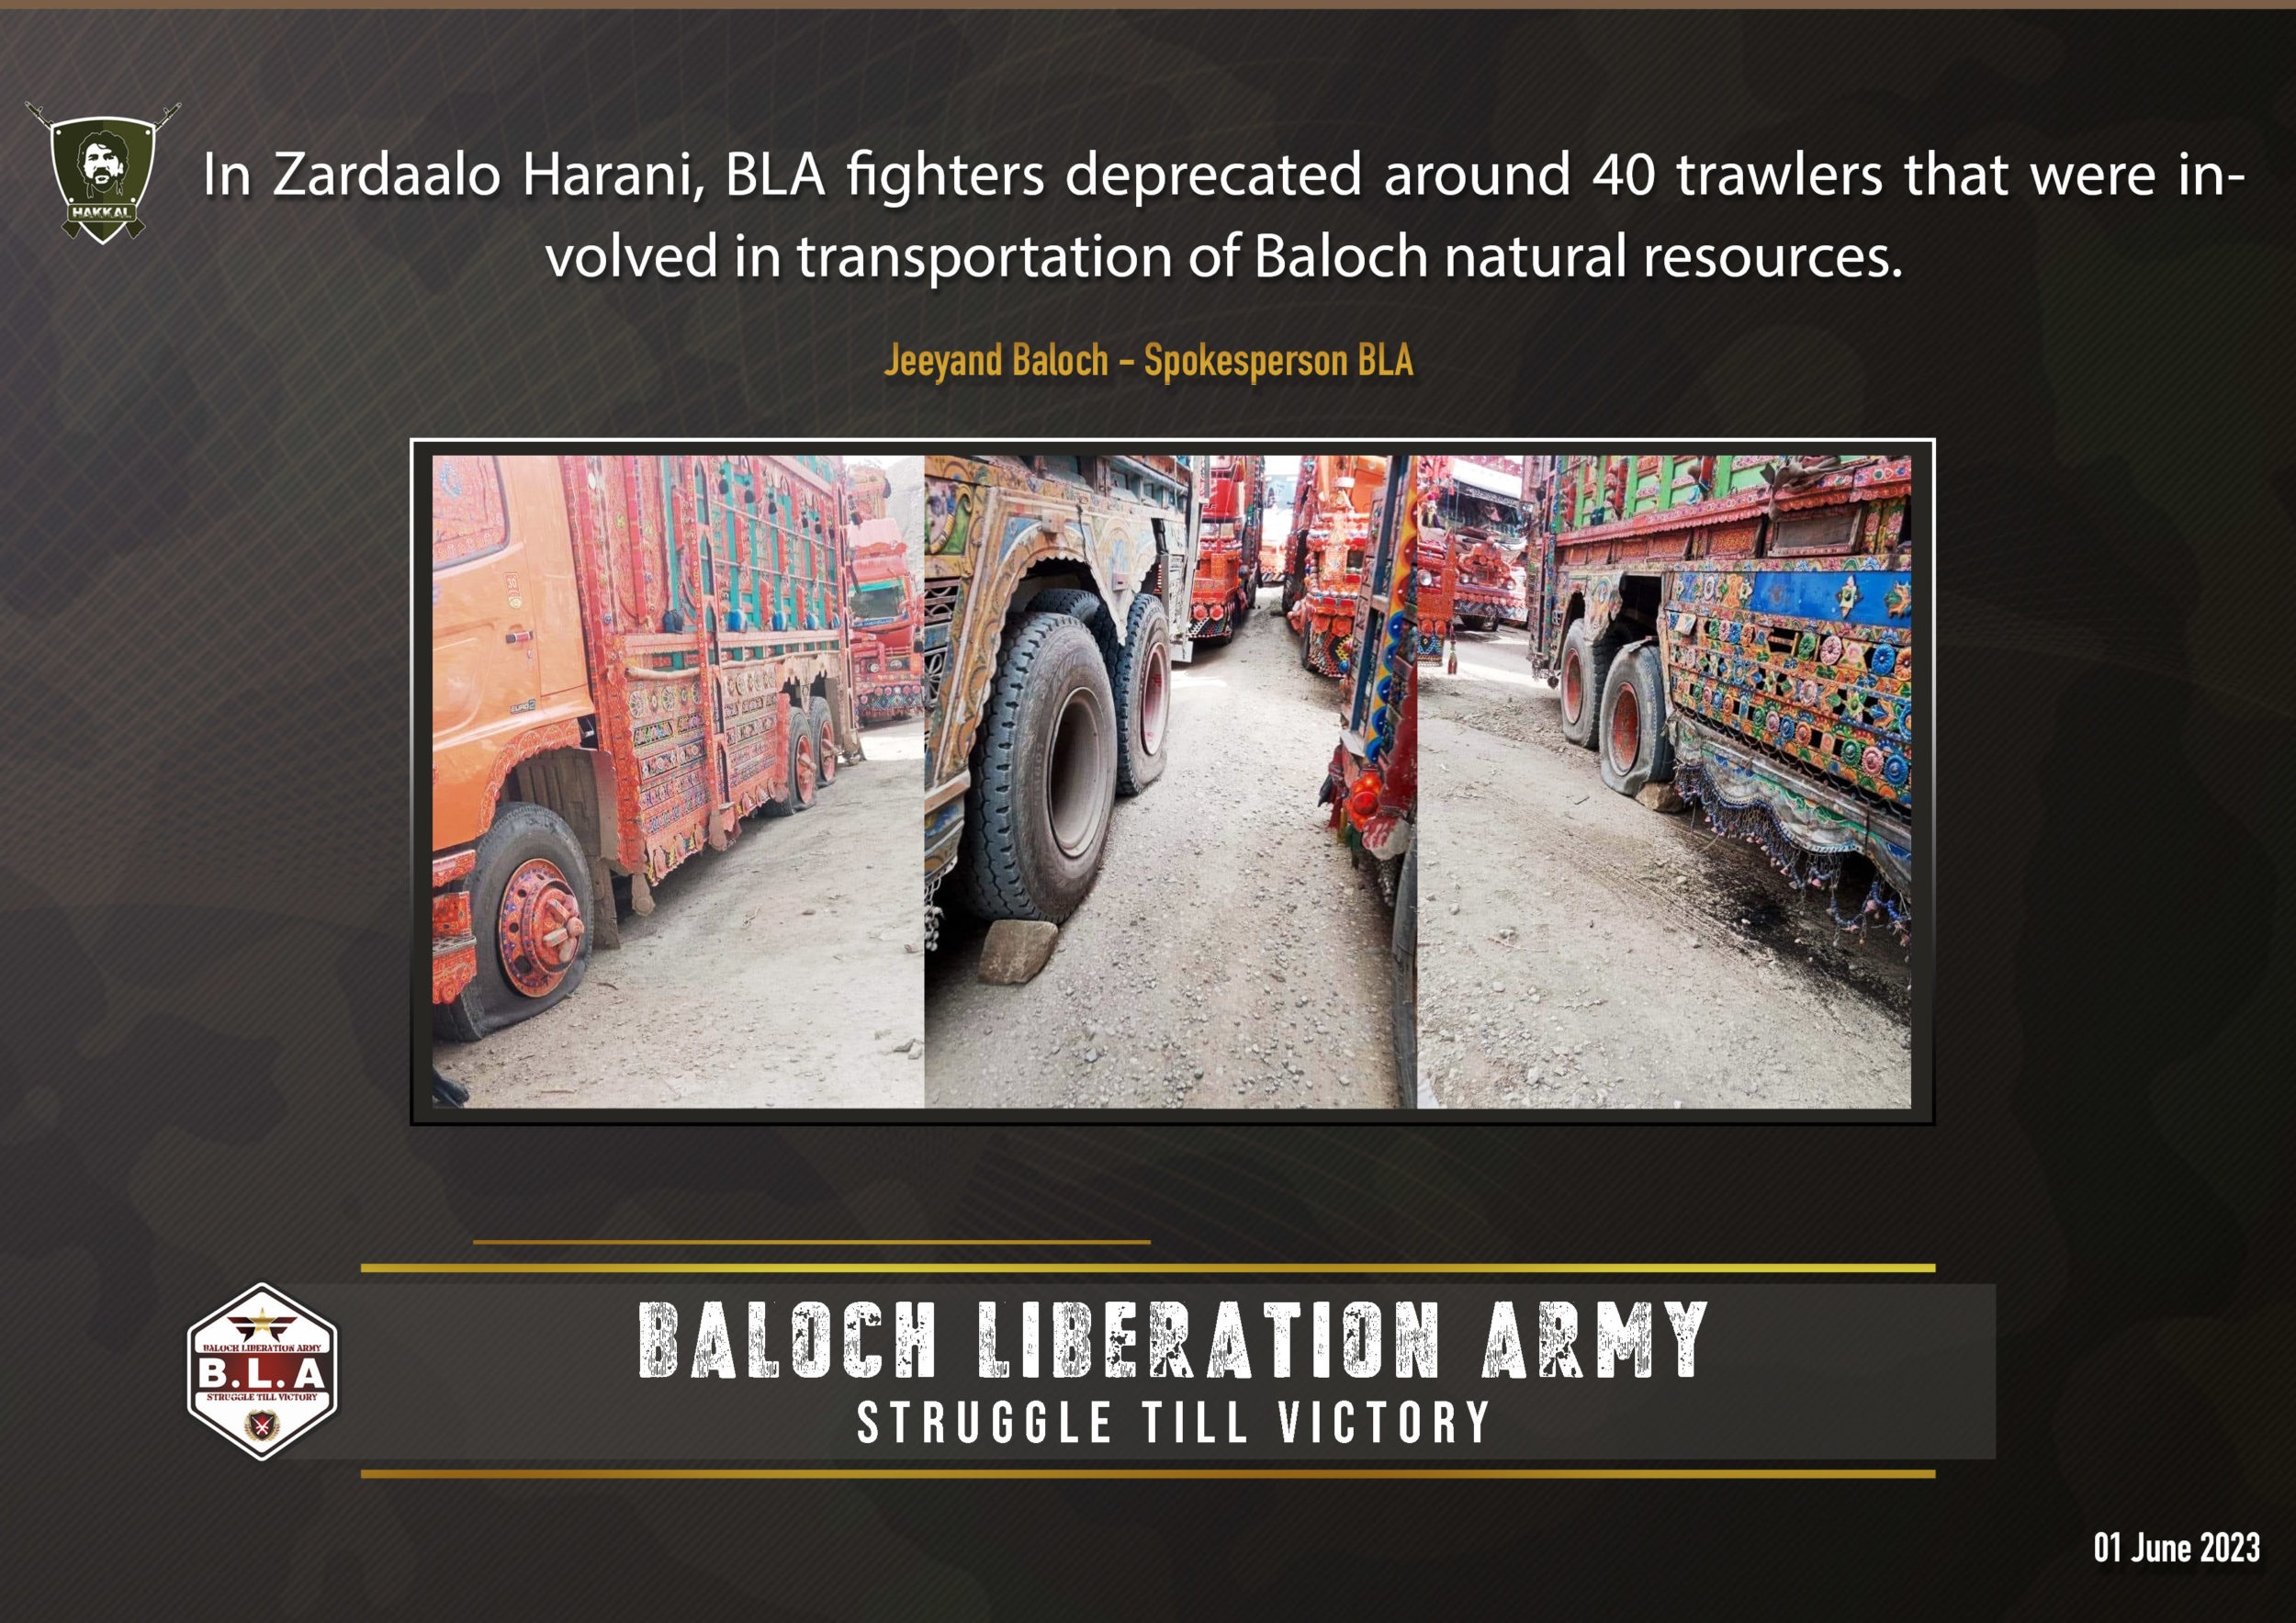 TRAC Incident Report: Baloch Liberation Army (BLA) Blocked the Highway and Attacked around 40 Trucks with Minerals in Zardaloo, Harnai, Balochistan, Pakistan – 31 May 2023